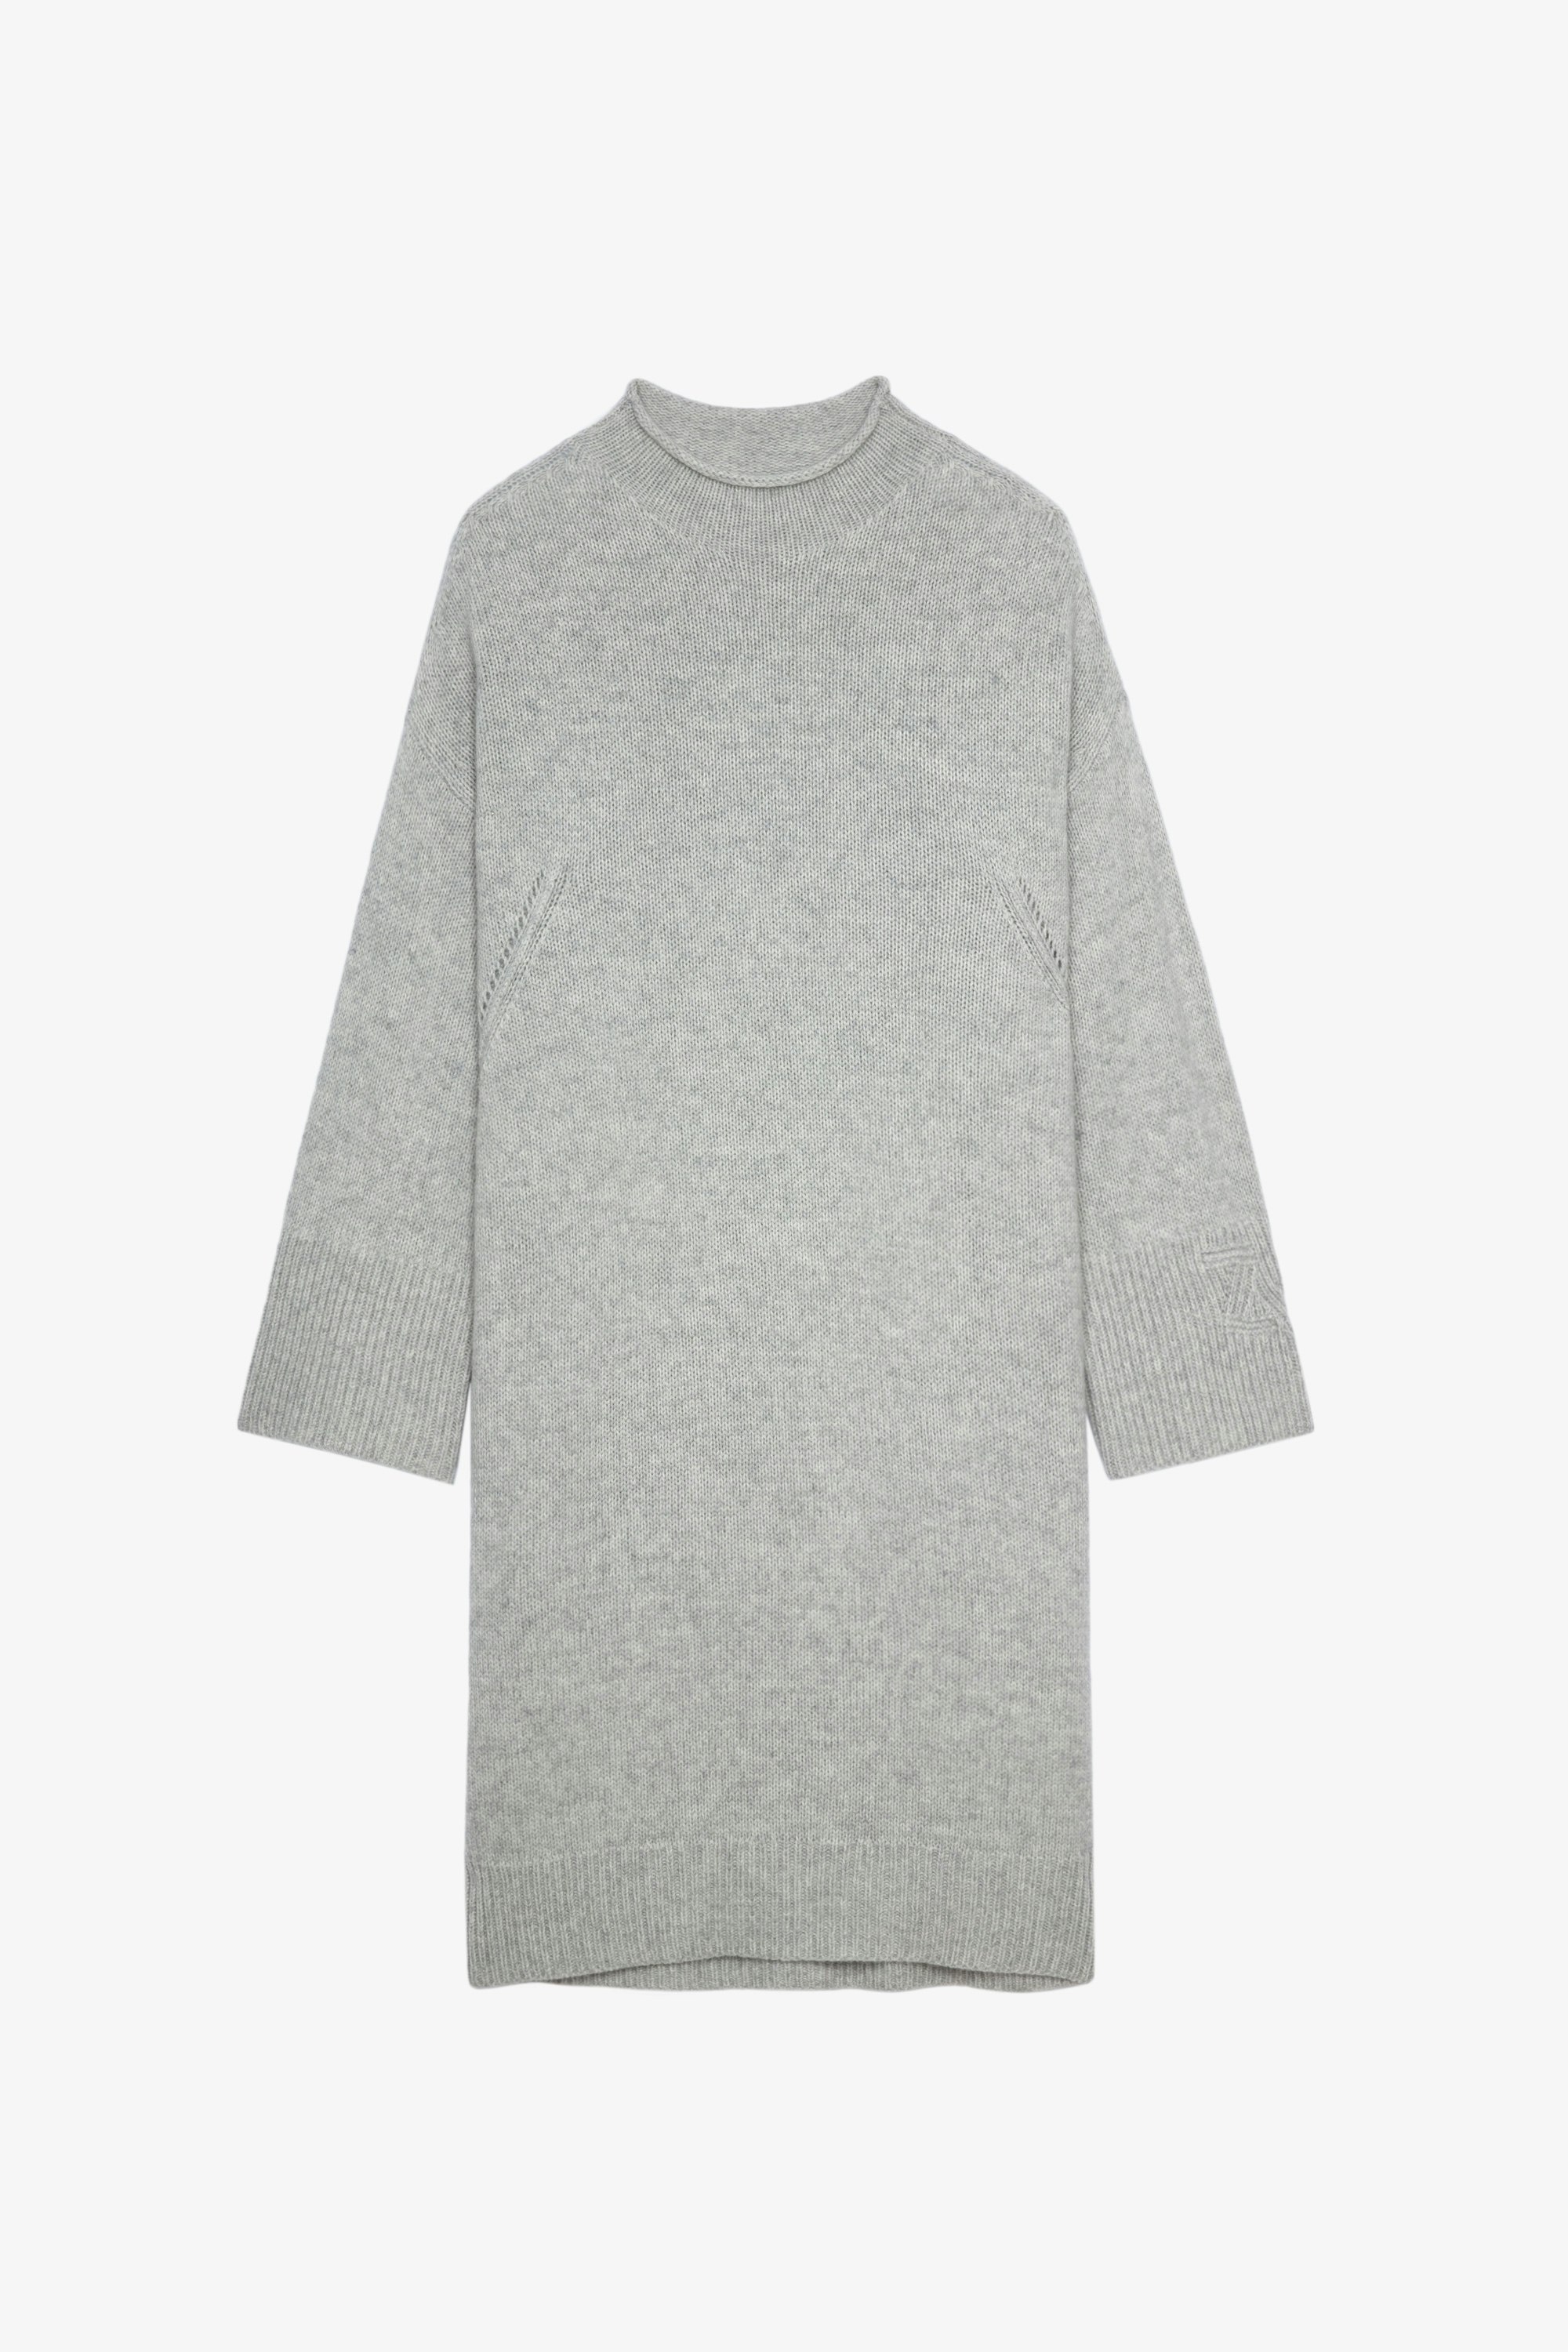 Selena Dress Oversized grey marl dress with round neckline and long sleeves 